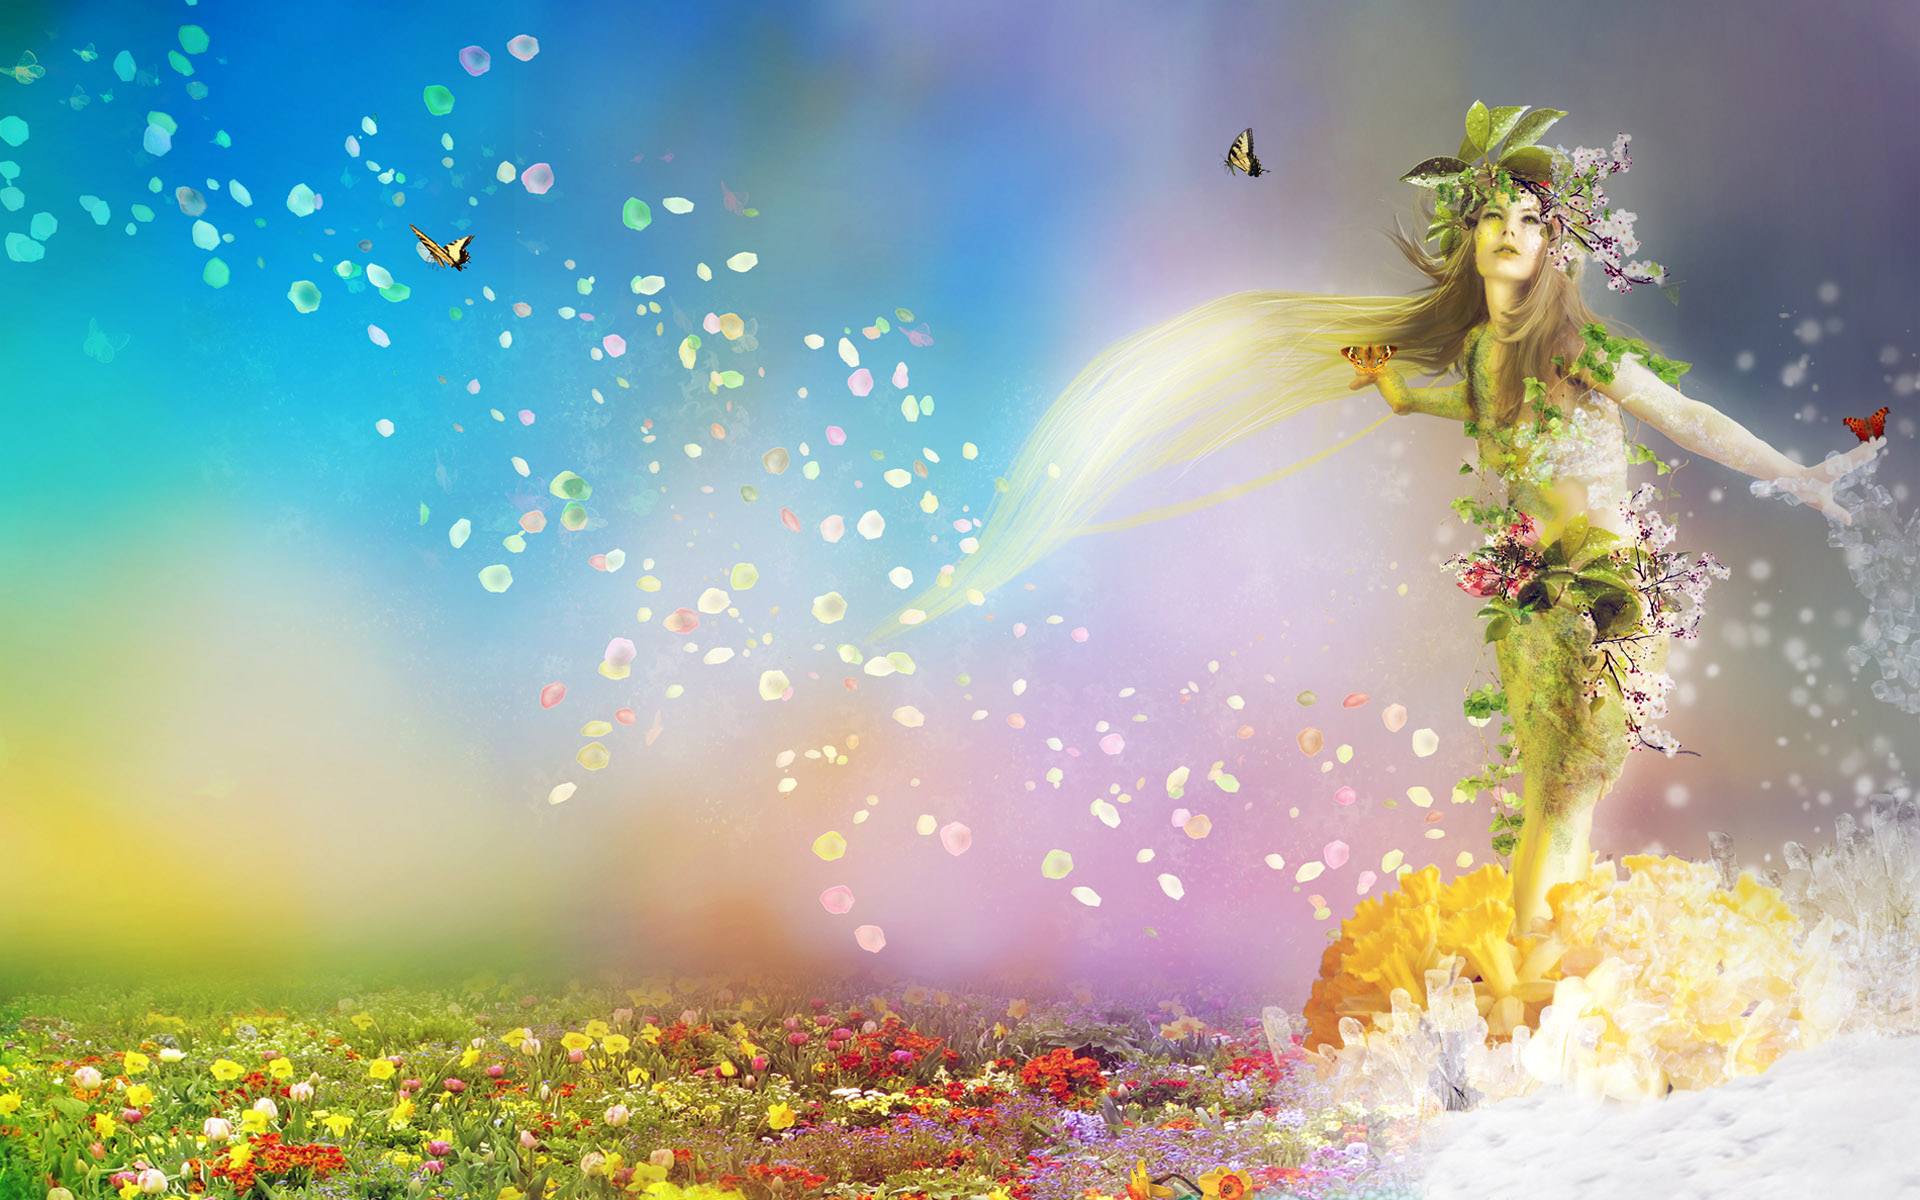 Goddess spring wallpapers and images   wallpapers pictures photos